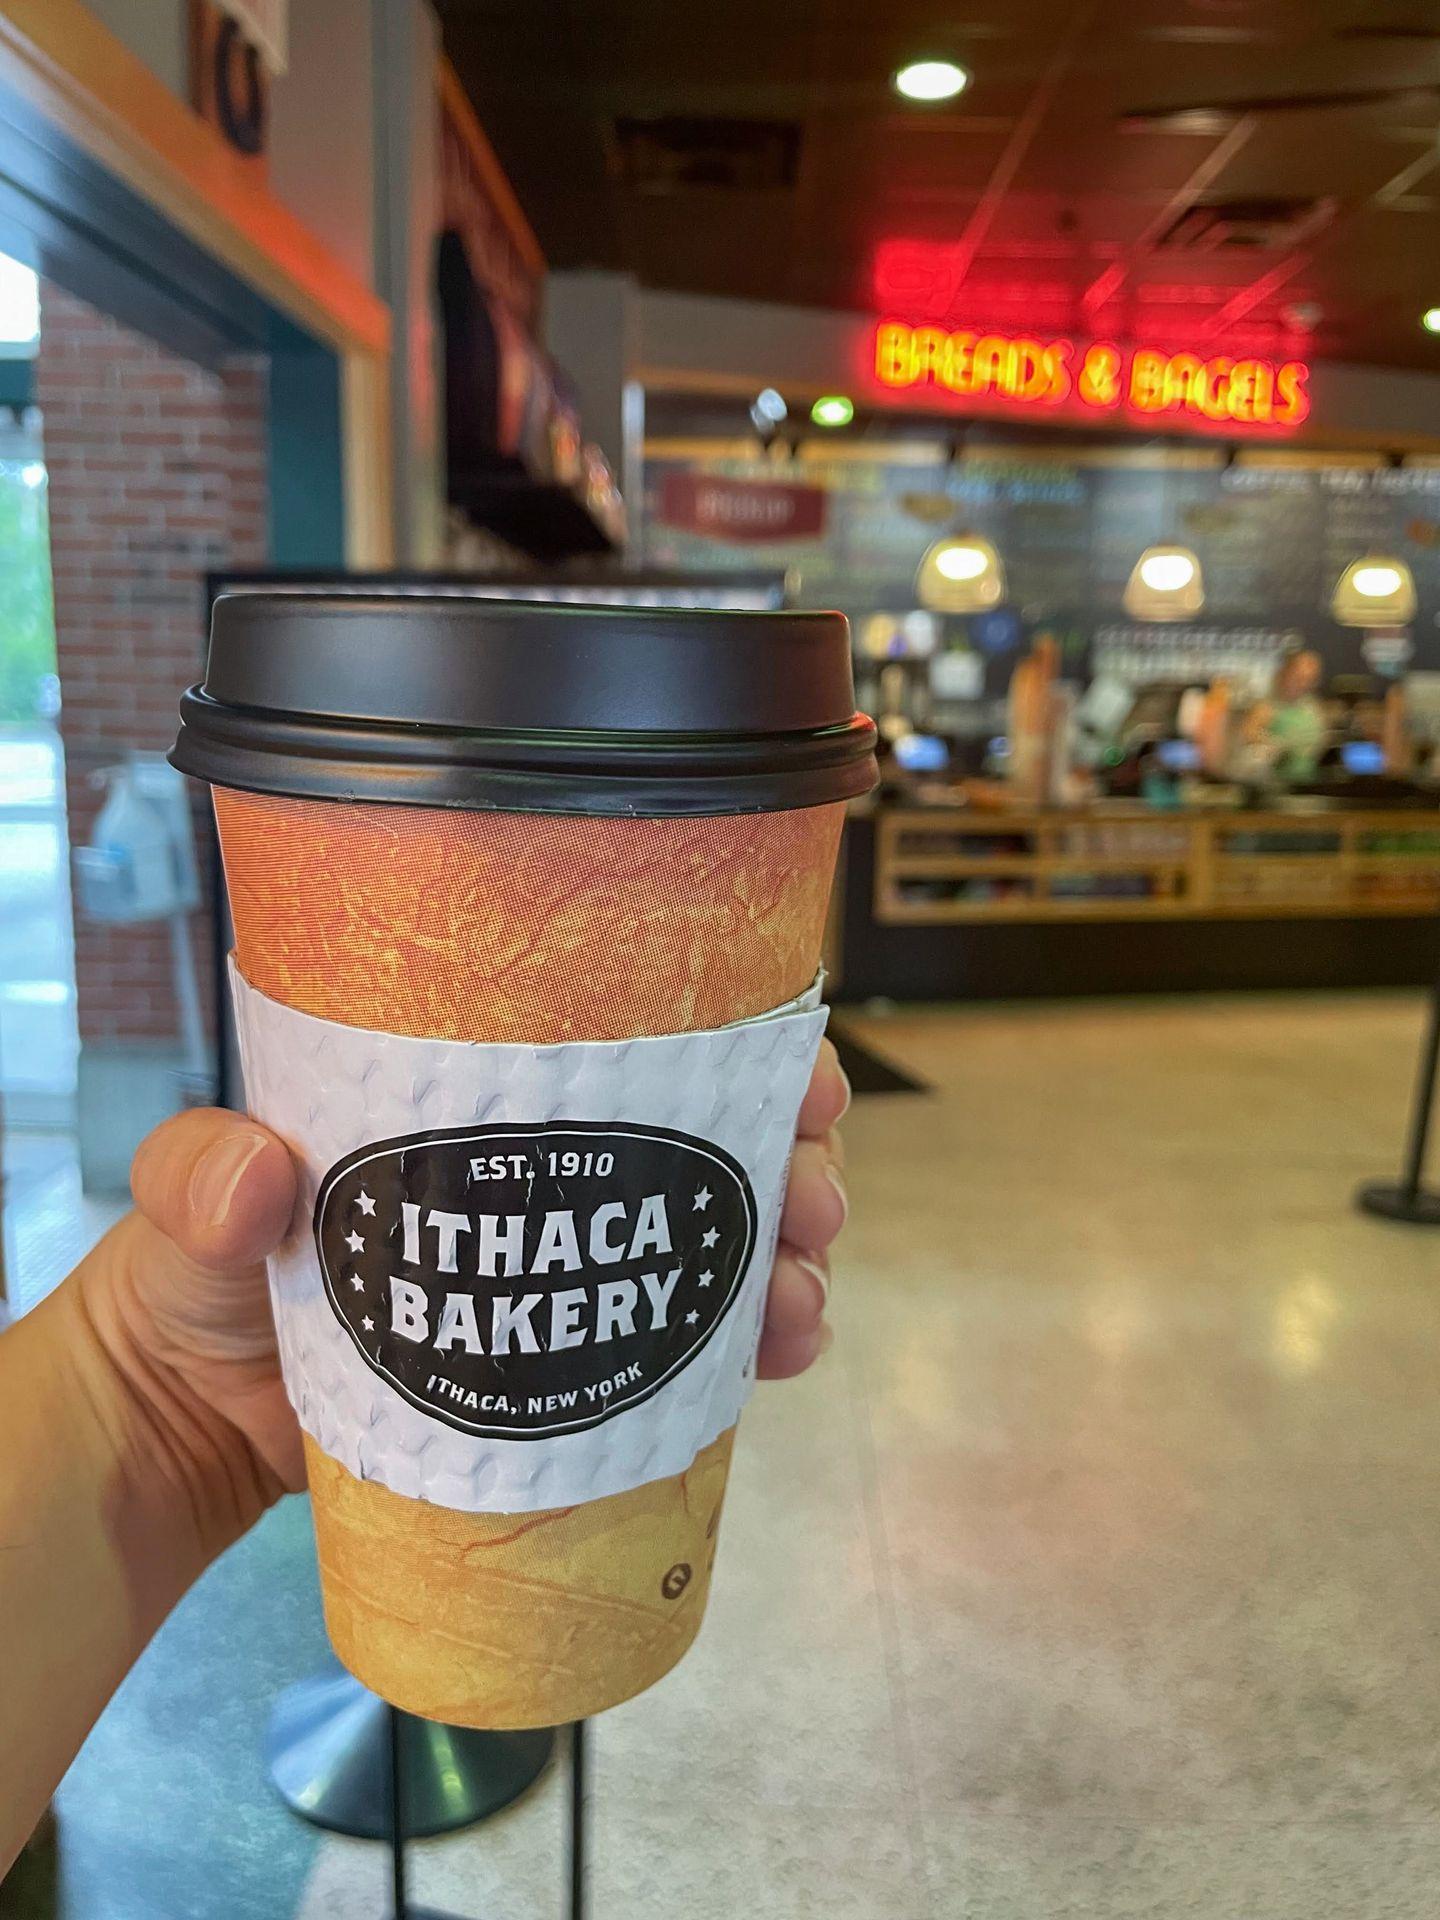 Holding up a to-go coffee from Ithaca Bakery.